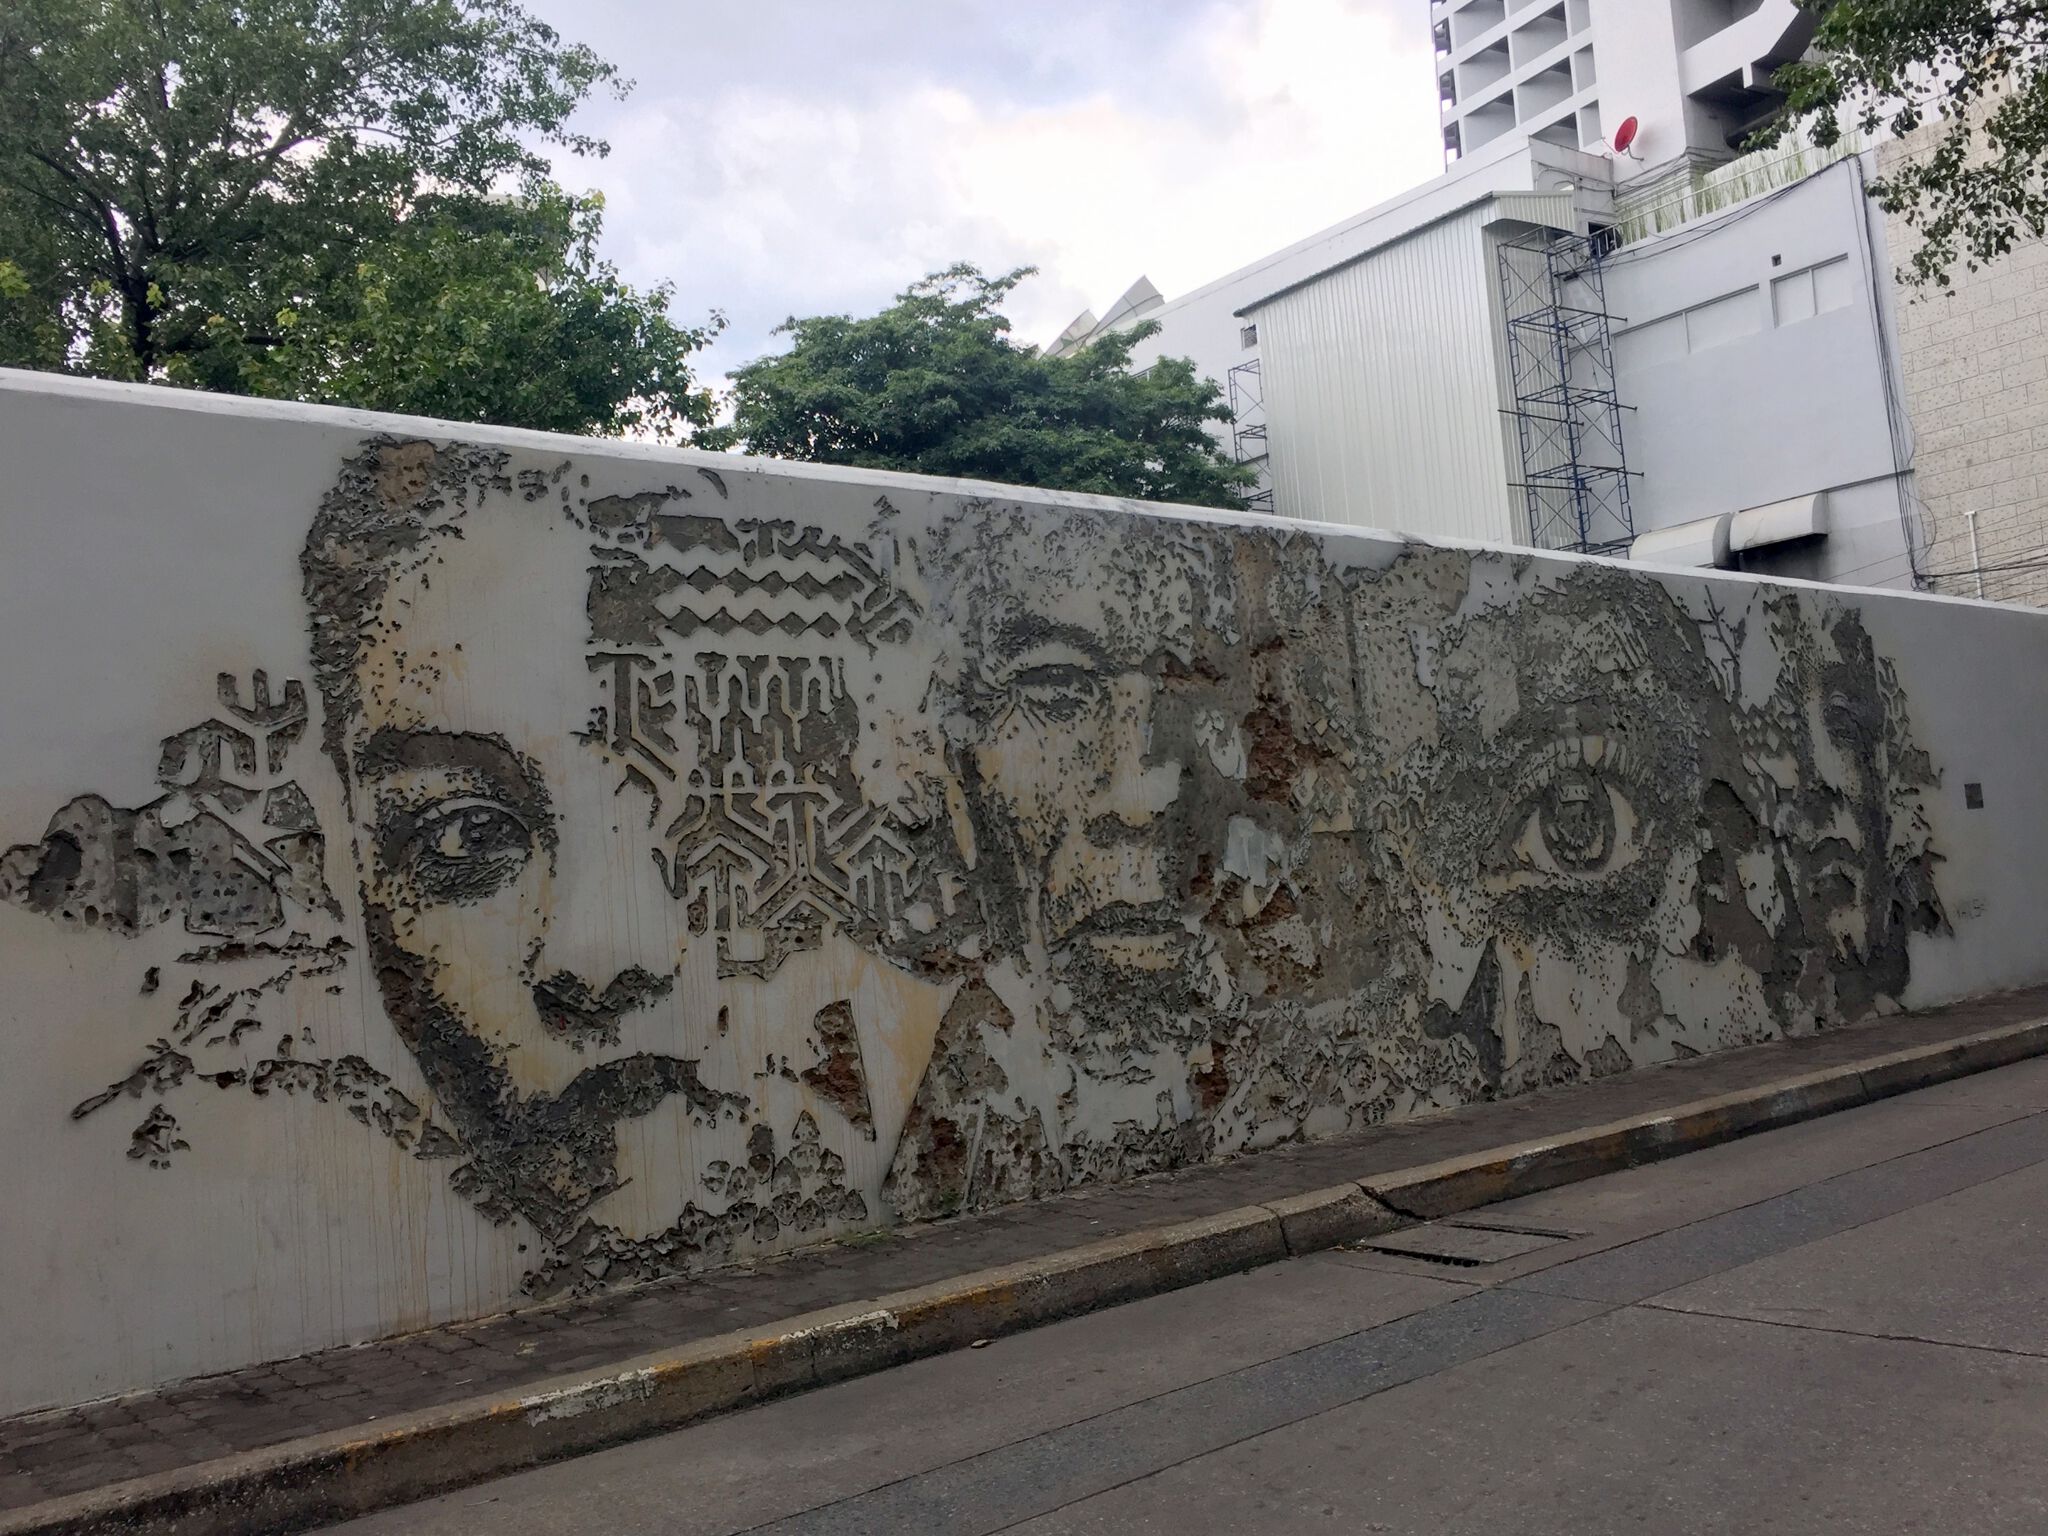 Vhils&mdash;Scratching the surface project